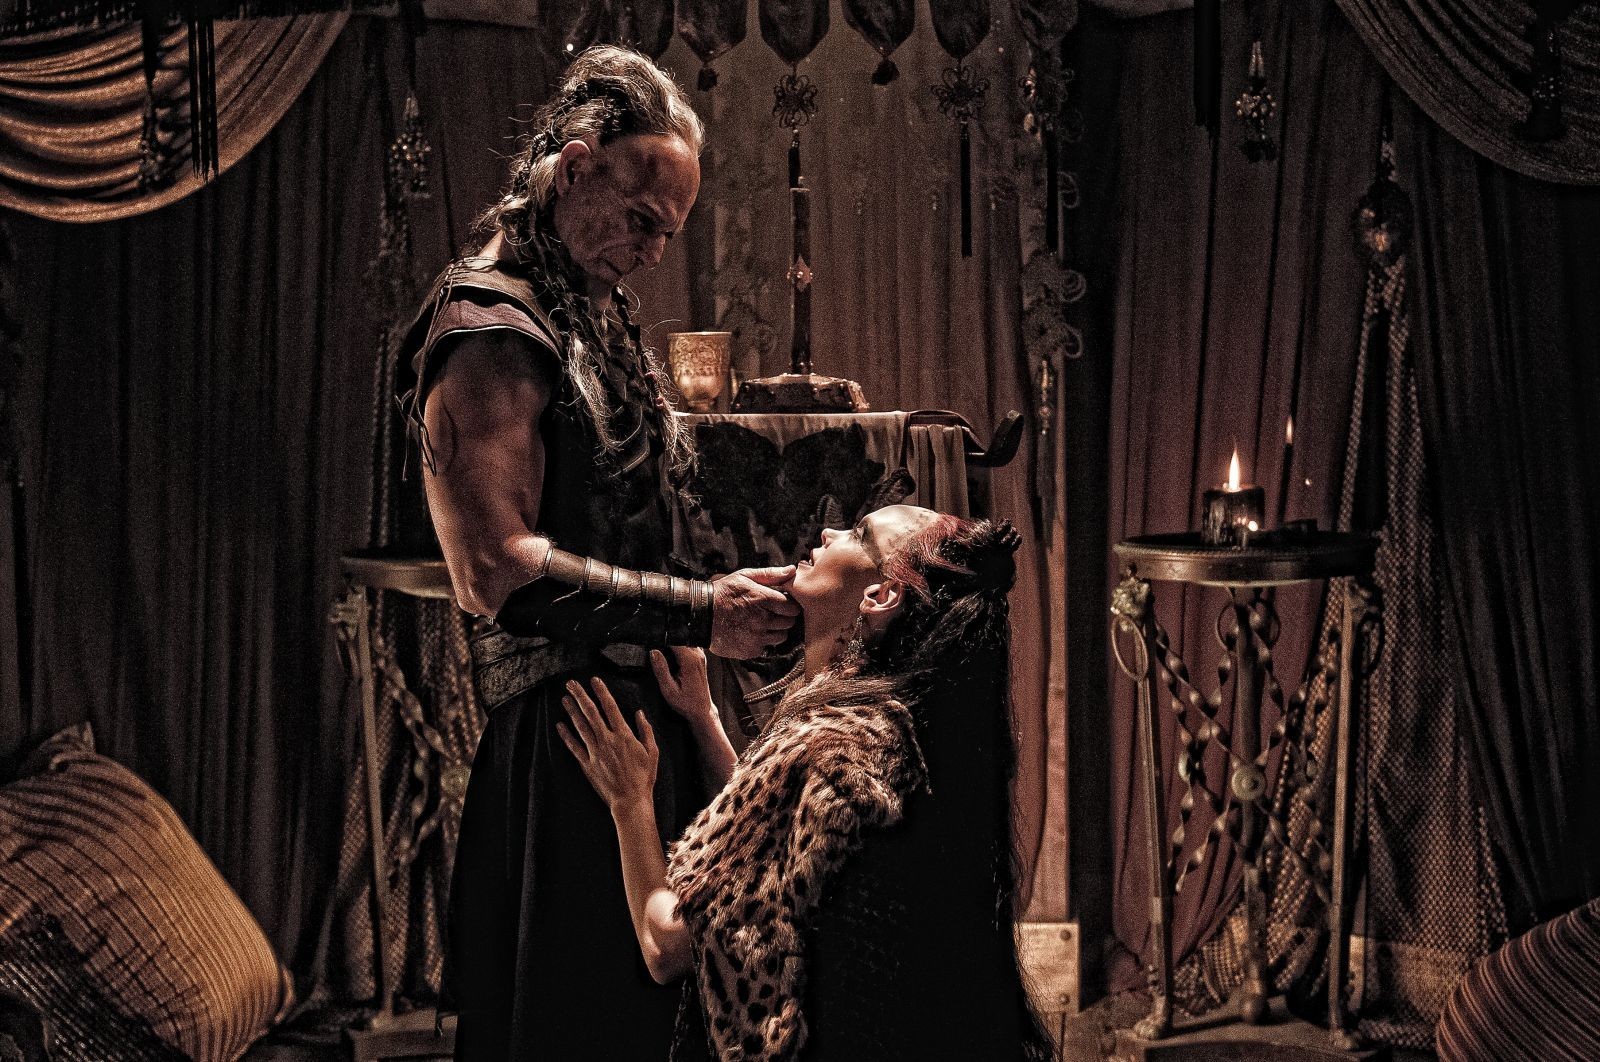 Stephen Lang stars as Khalar Zym and Rose McGowan stars as Marique in Lionsgate Films' Conan the Barbarian (2011)